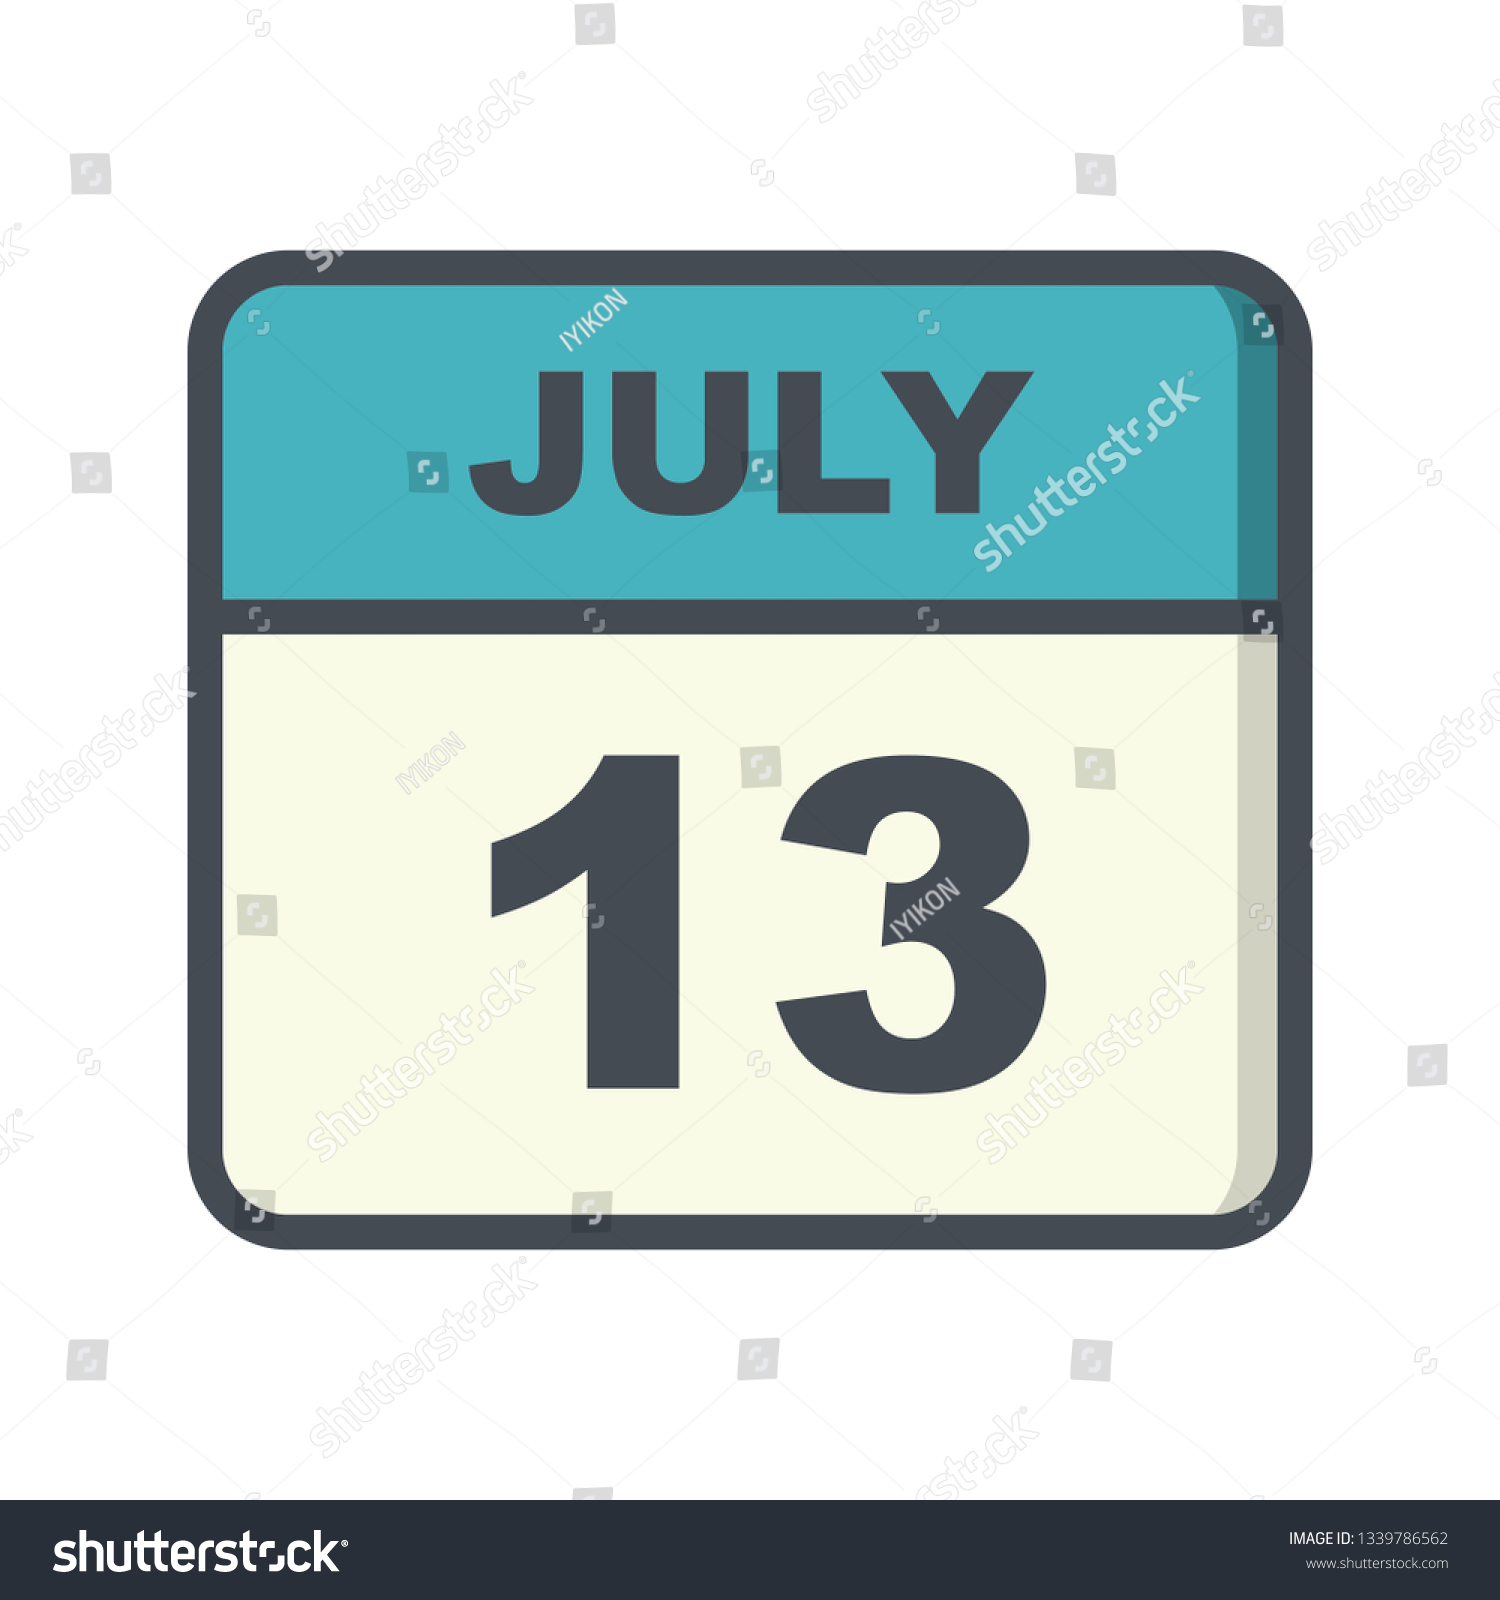 July 13th Date on a Single Day Calendar Royalty Free Stock Photo